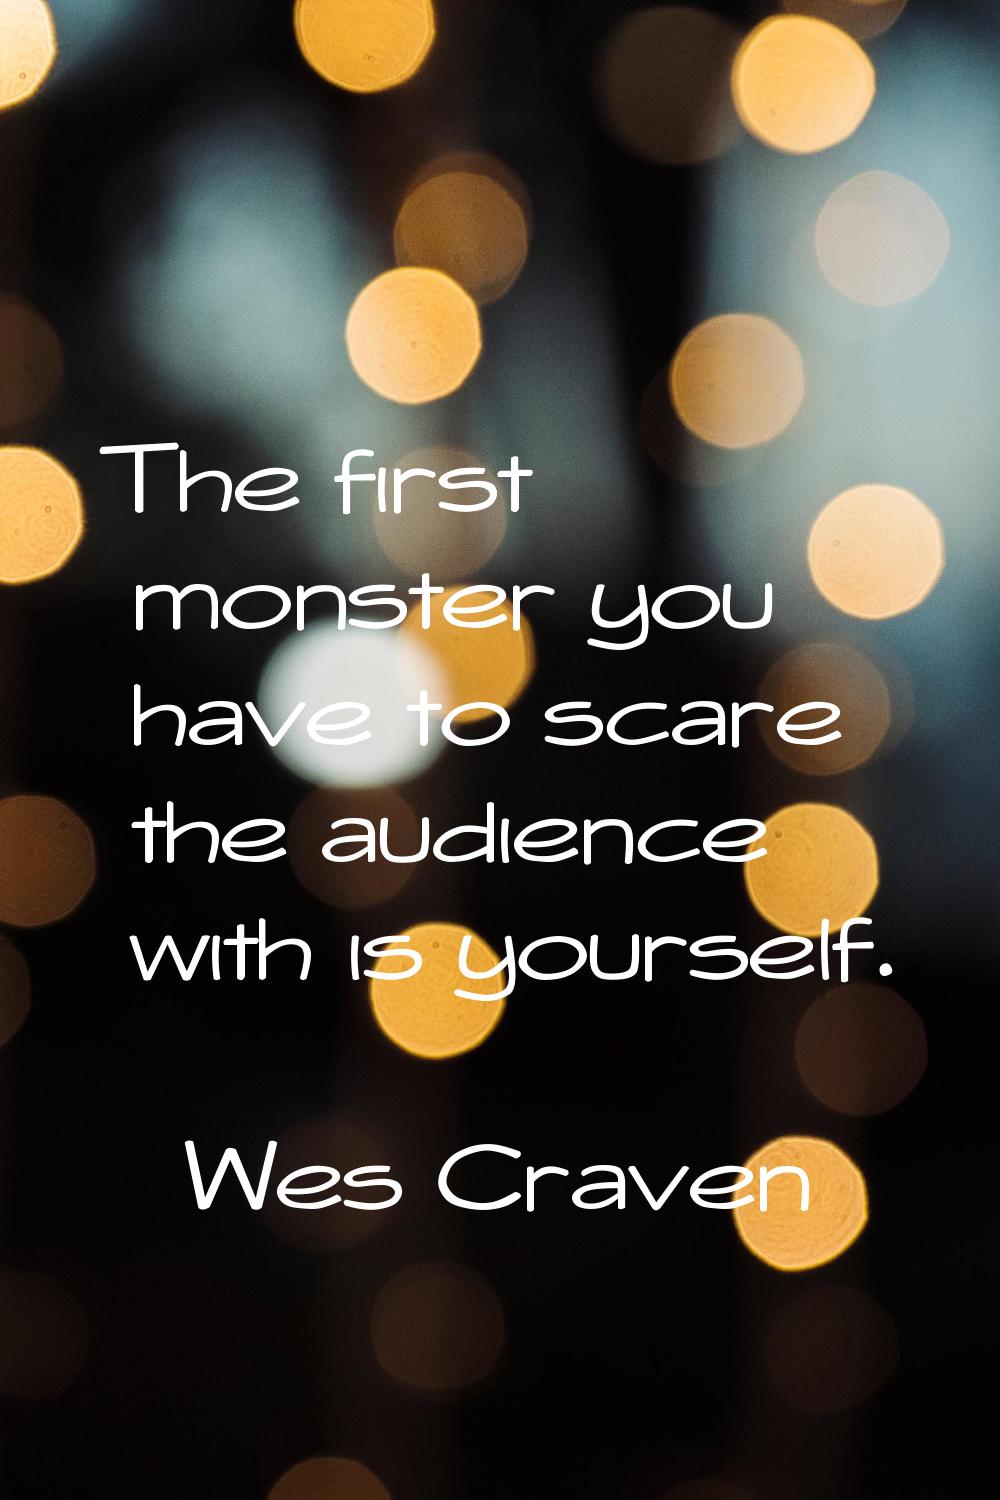 The first monster you have to scare the audience with is yourself.